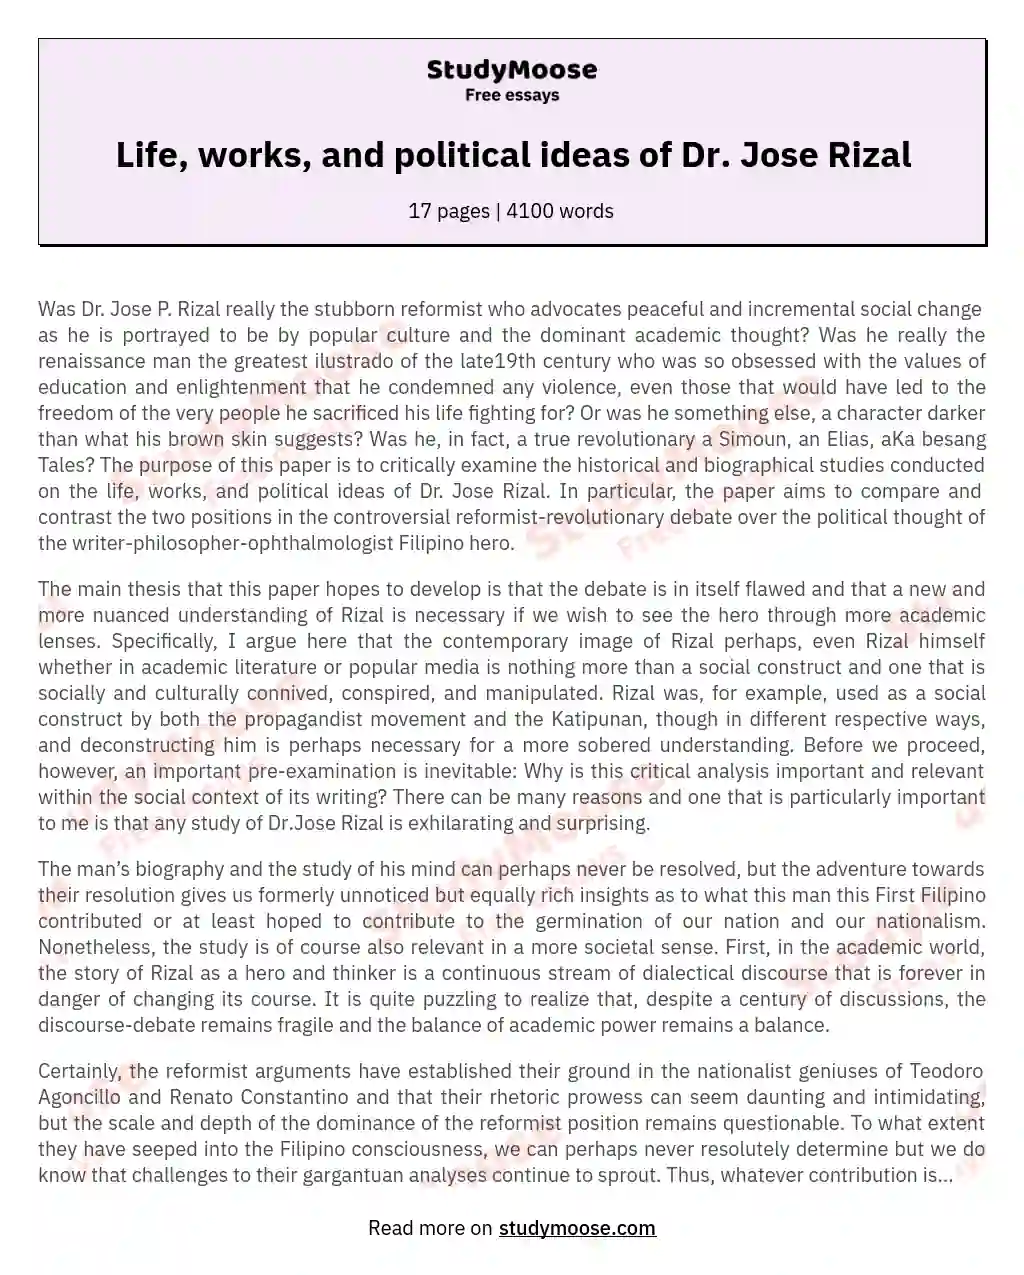 Life, works, and political ideas of Dr. Jose Rizal essay